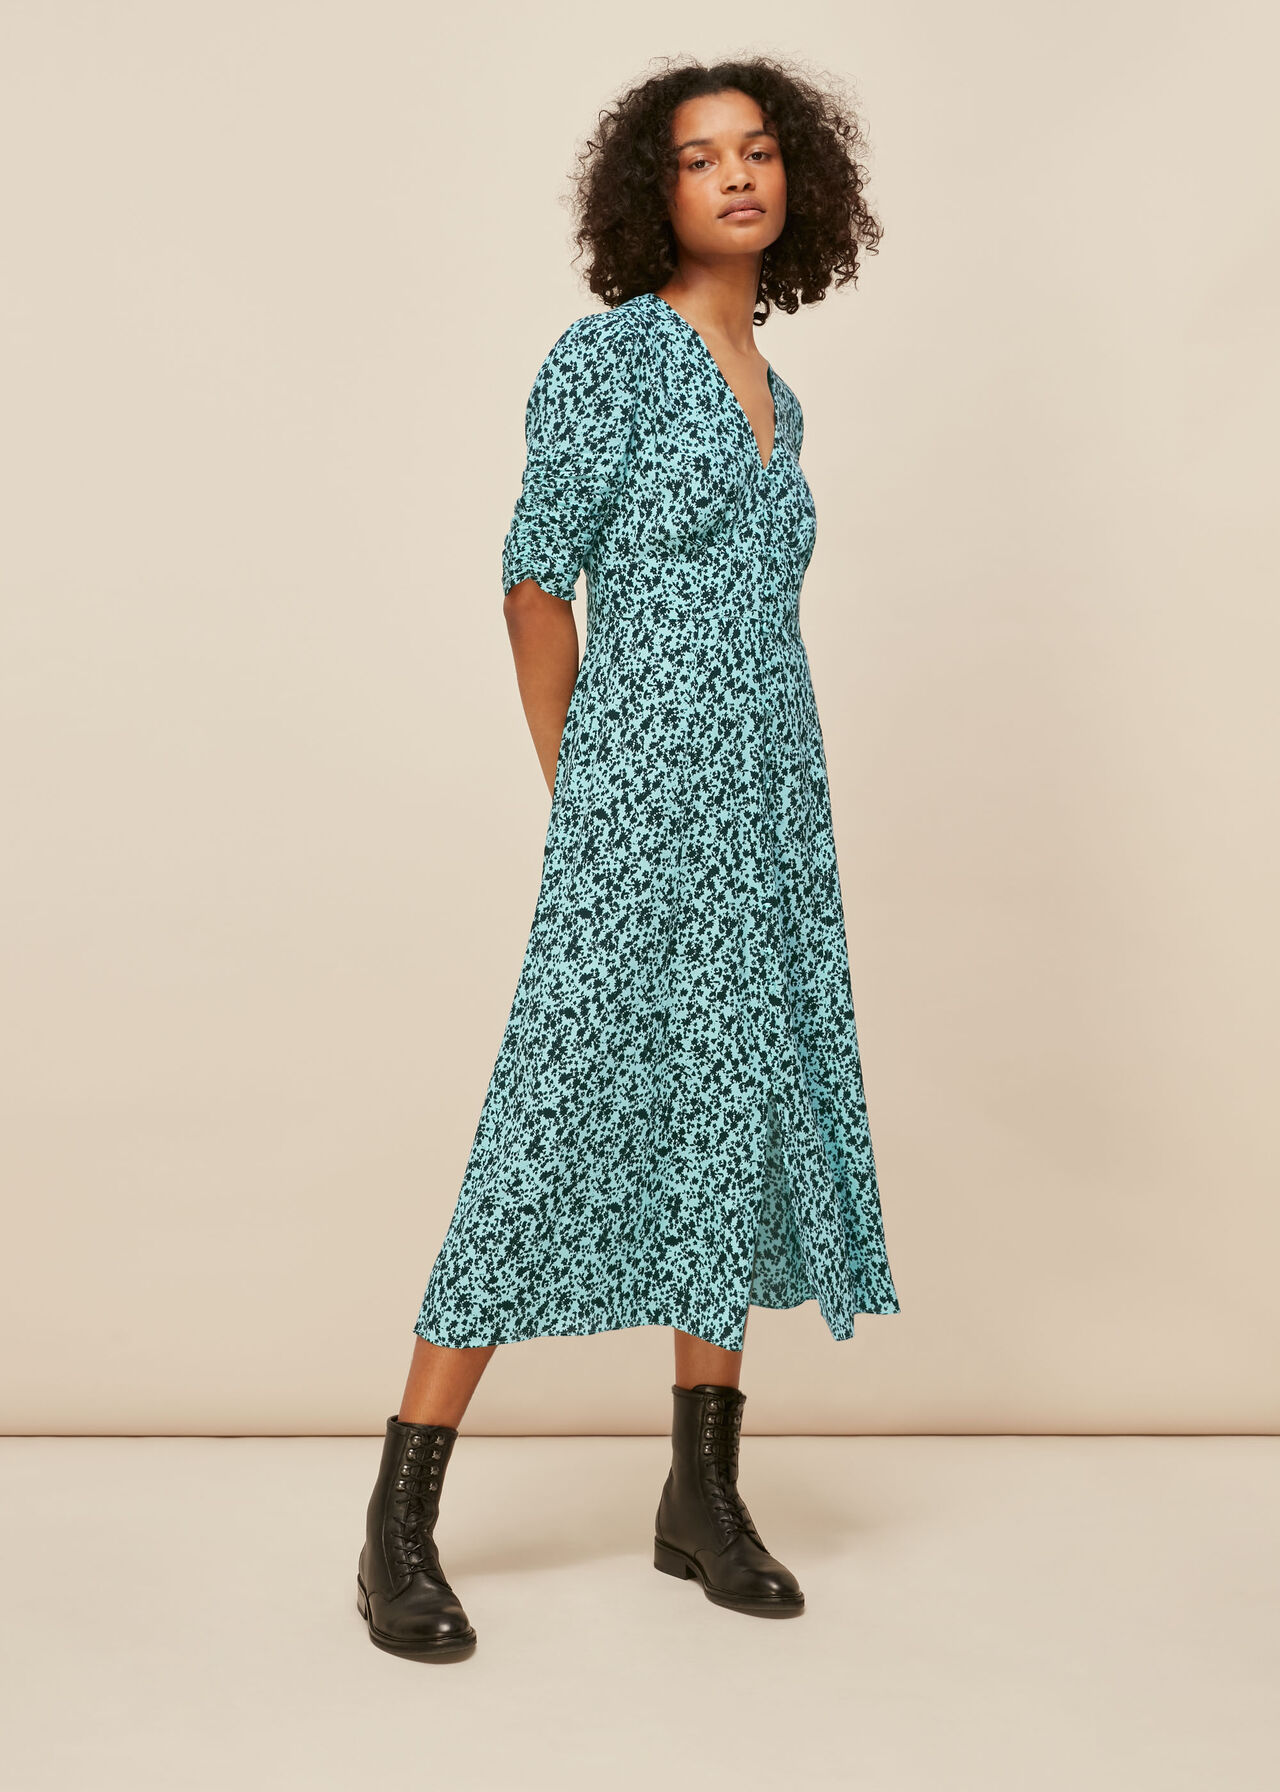 Blue/Multi Midnight Meadow Floral Dress, WHISTLES